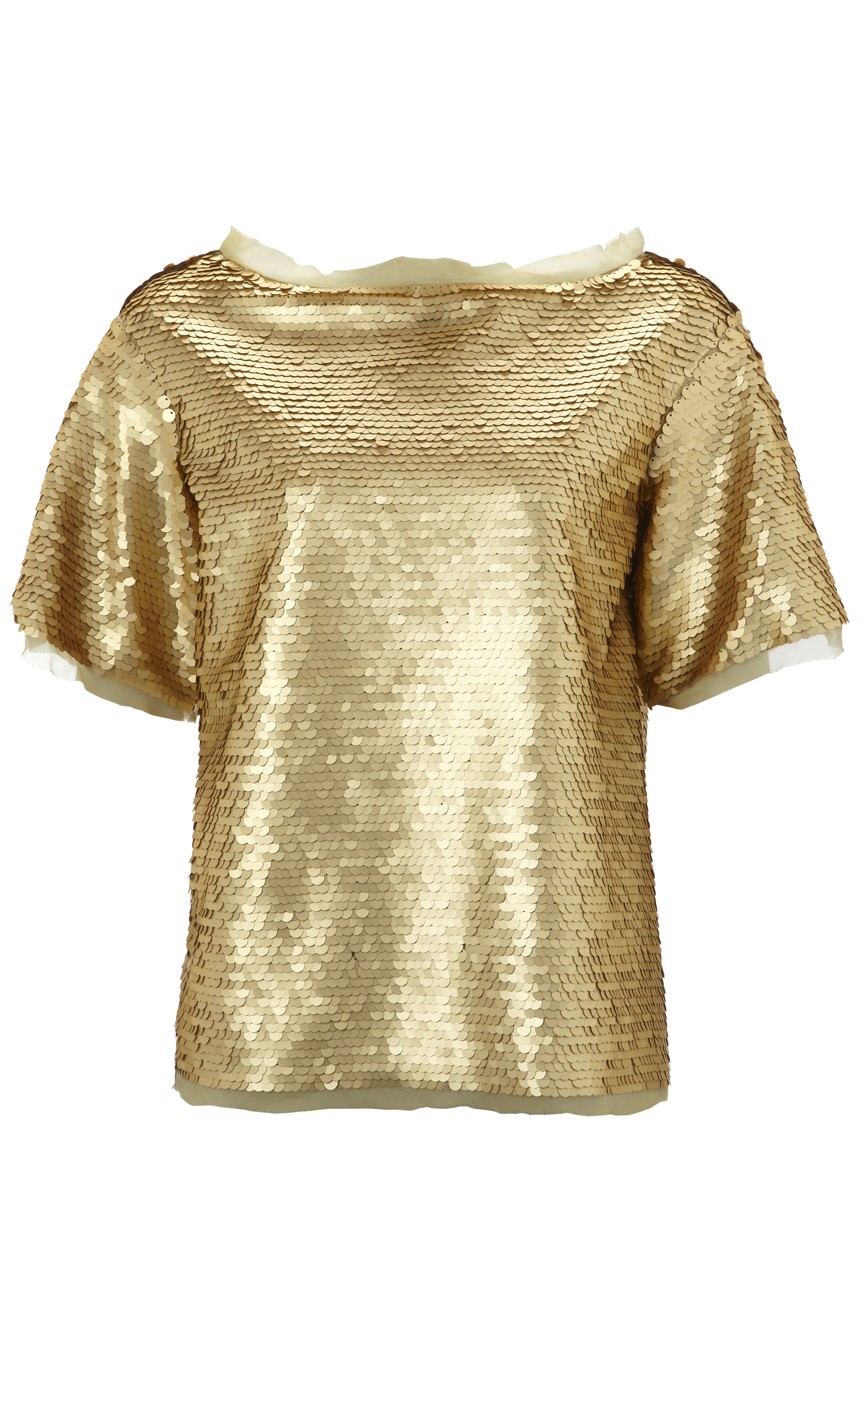 Gold Sequin T-shirt - All Clothing - Shop Online